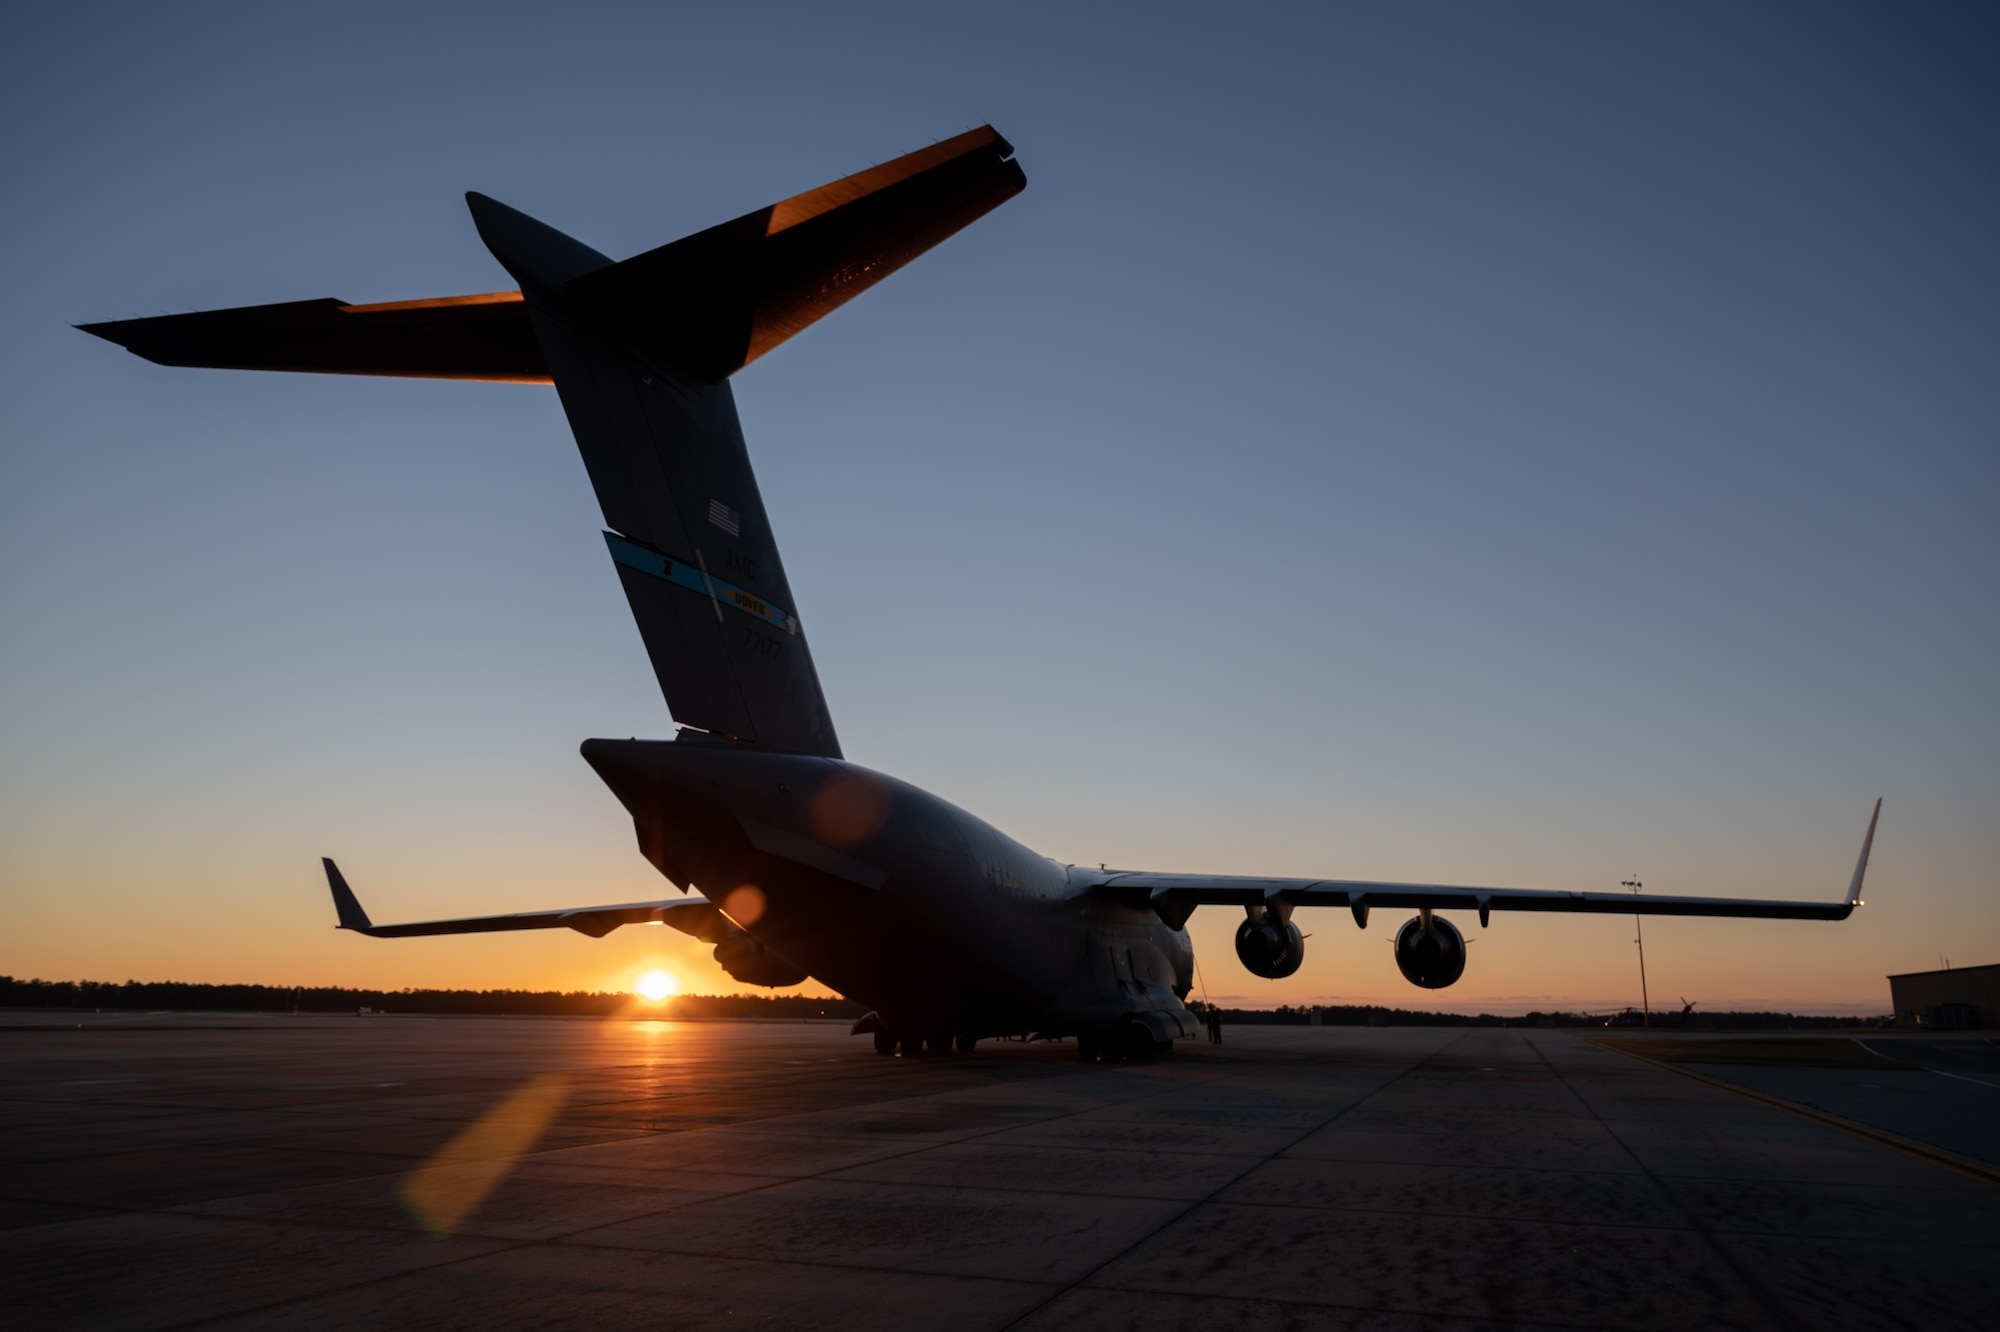 A Dover Air Force Base C-17 Globemaster III prepares for takeoff during exercise Mosaic Tiger at Moody AFB, Georgia, Feb. 23, 2021. Airmen from four different bases, representing two major commands, participated in the exercise that included multiple Air and Space Force installations.  (U.S. Air Force photo by Airman 1st Class Faith Schaefer)